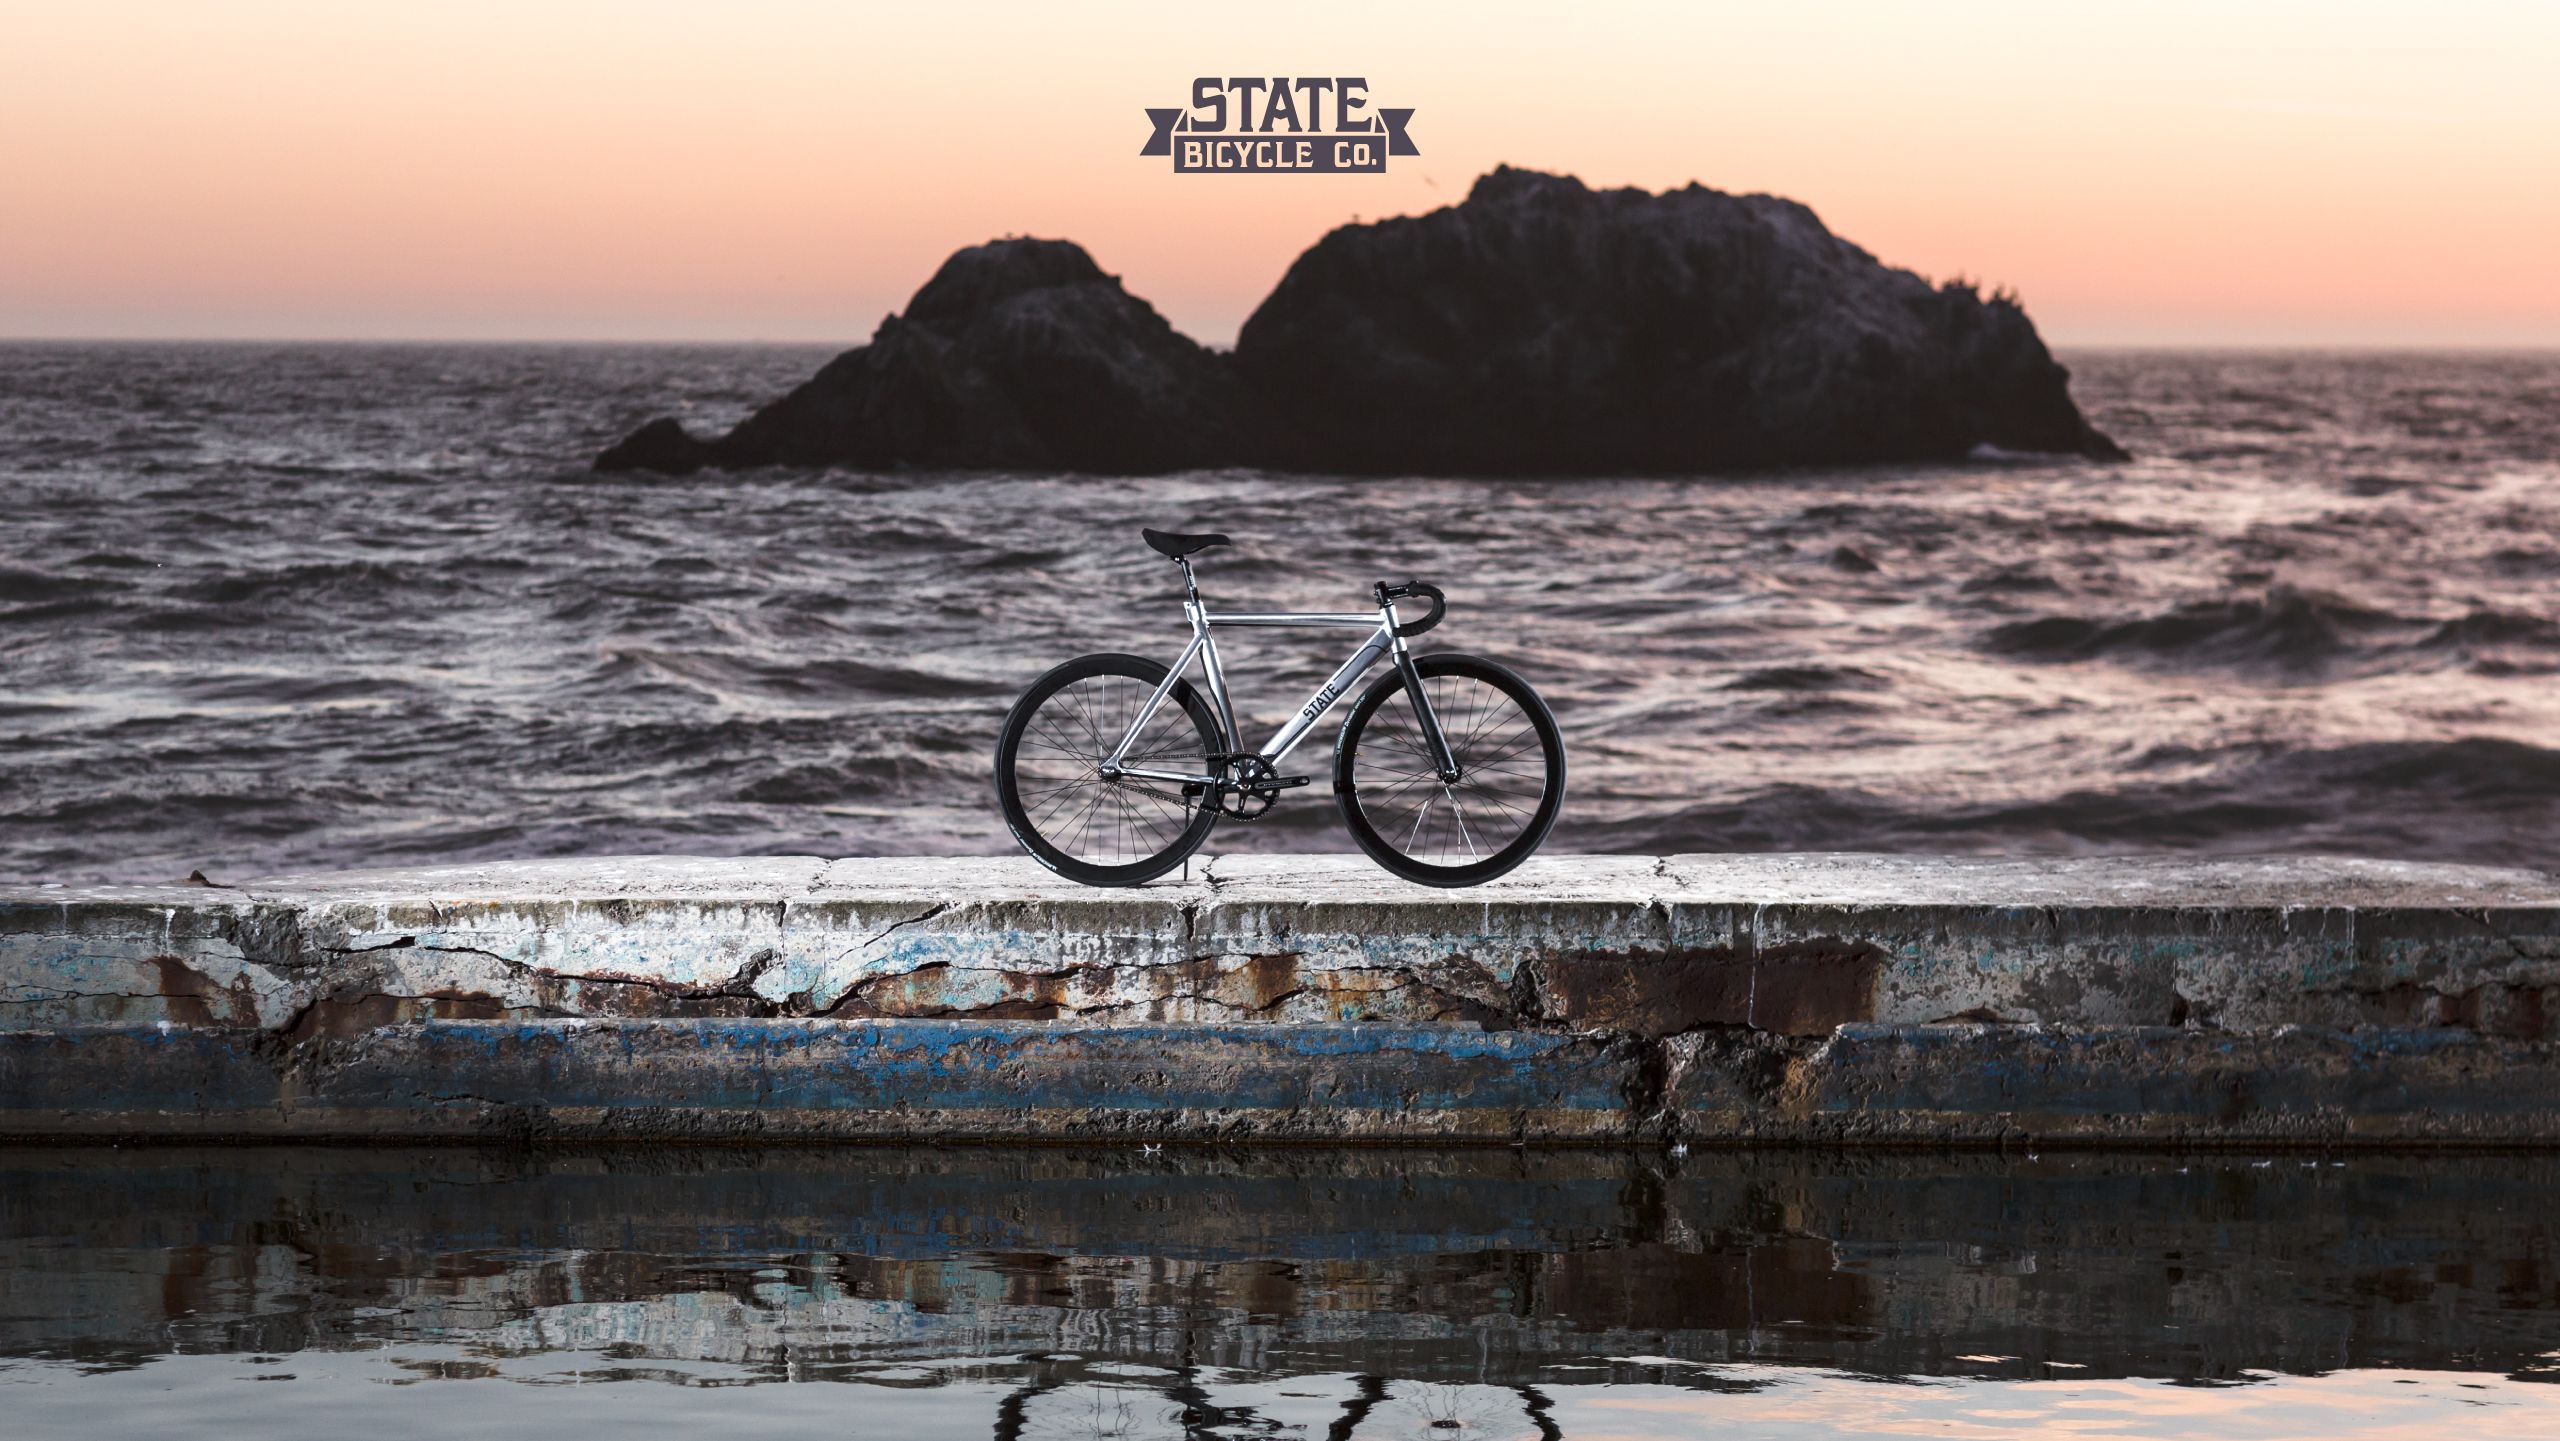 Monthly Wallpaper August 2014 State Bicycle Co